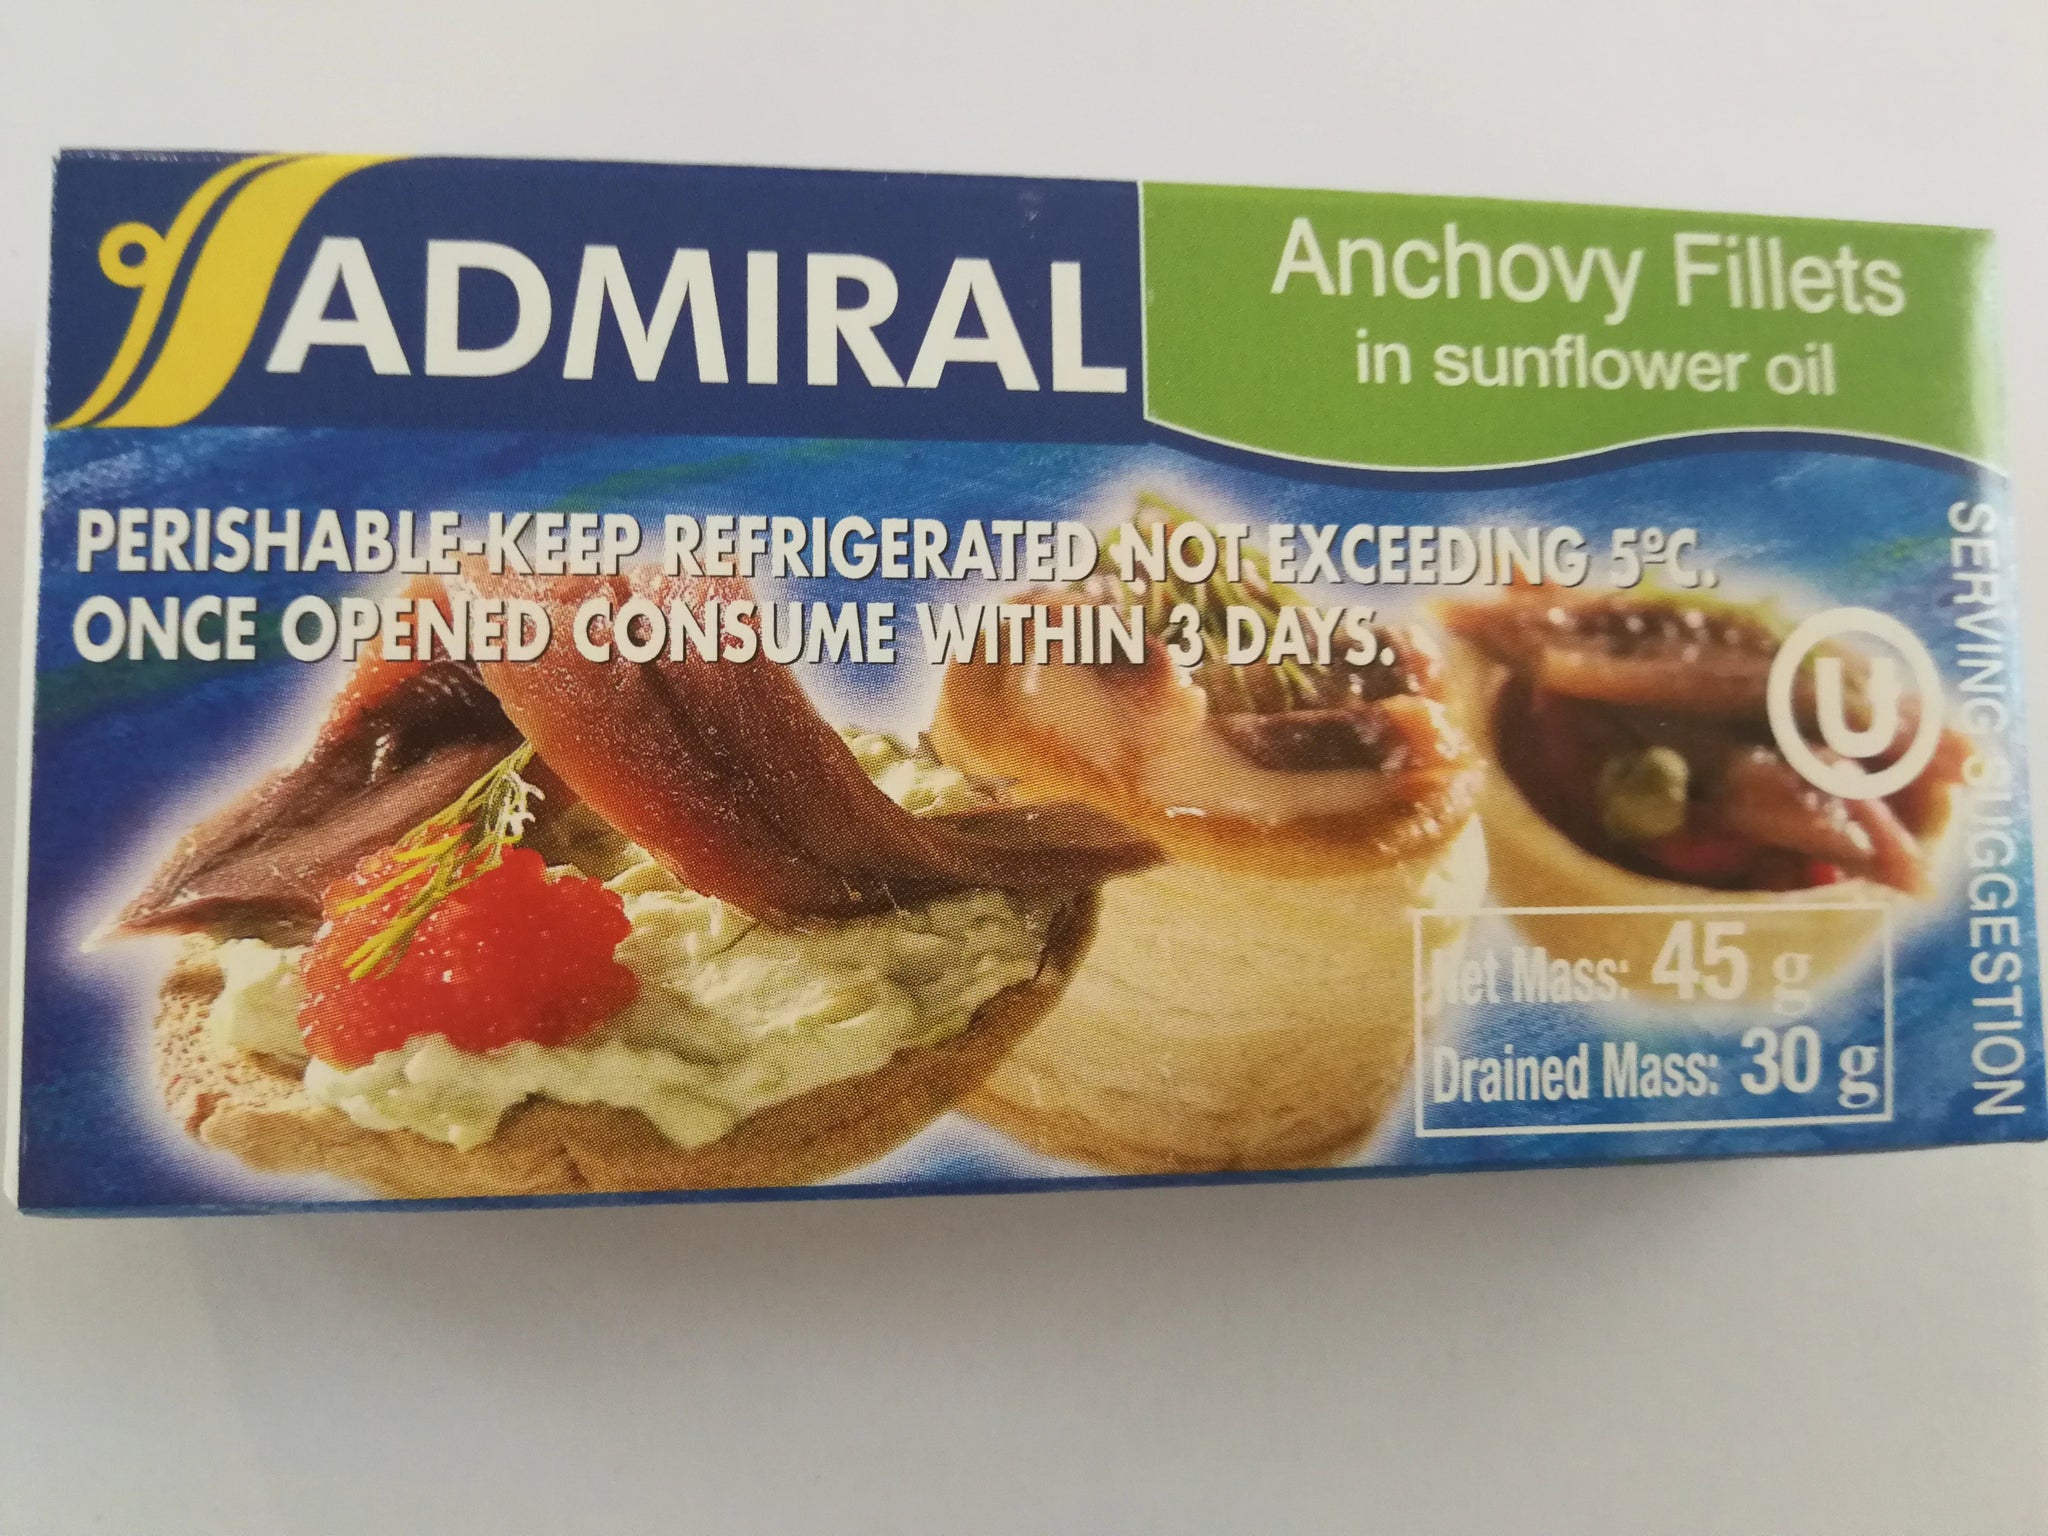 Admiral Anchovy Fillets in Sunflower Oil 45g